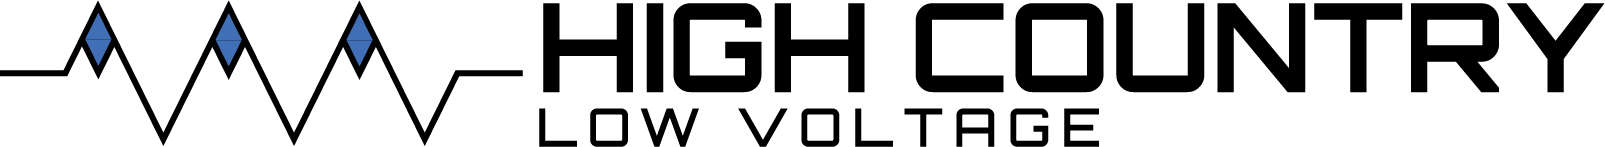 High Country Low Voltage Logo